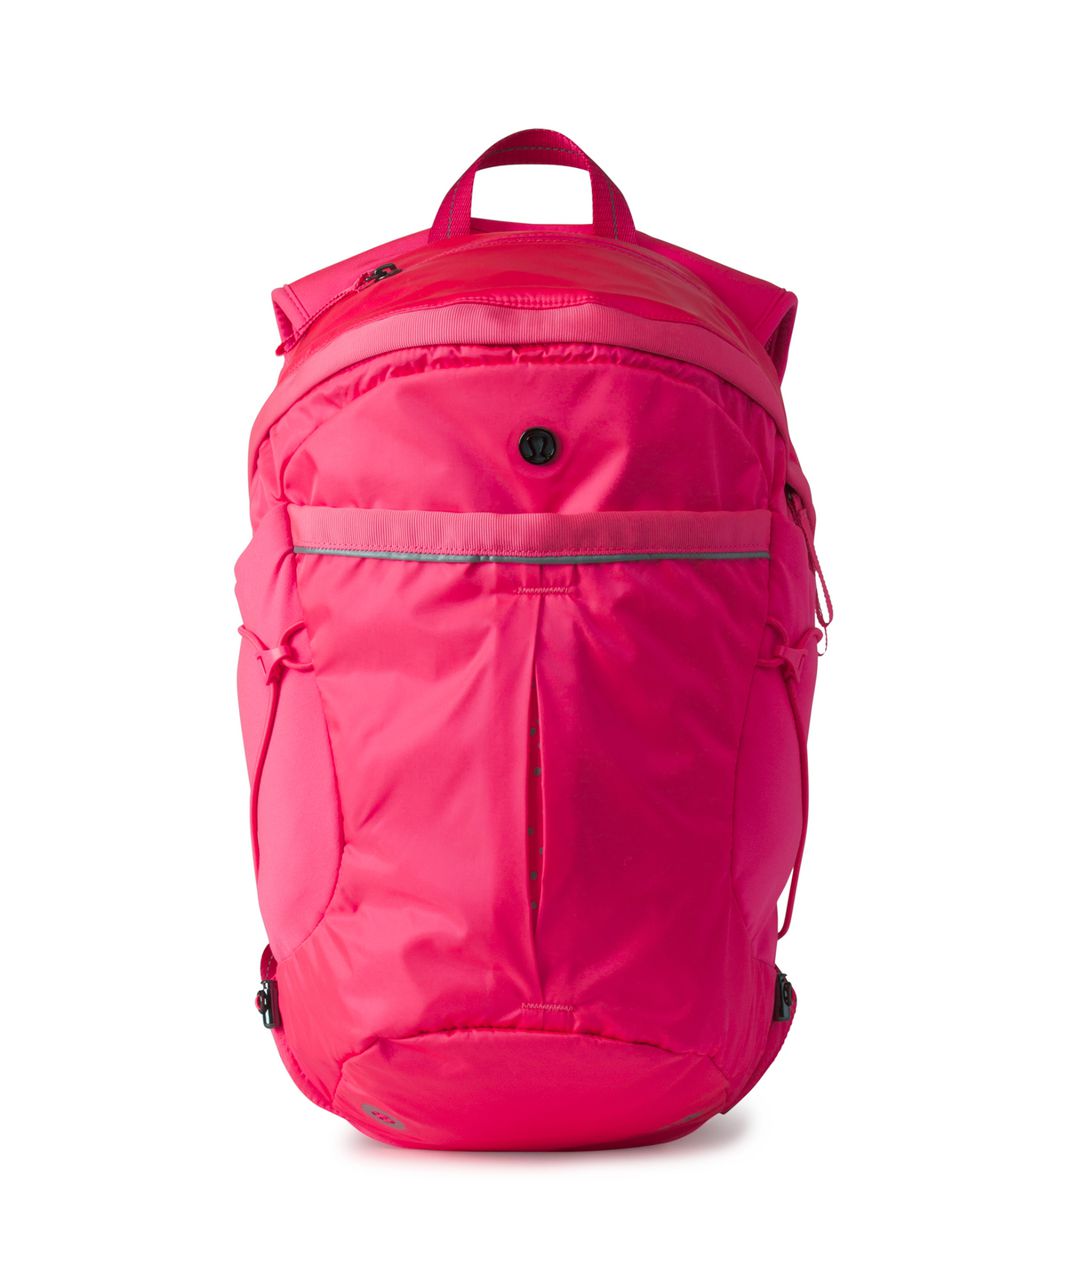 Lululemon Run All Day Backpack - Neon Pink